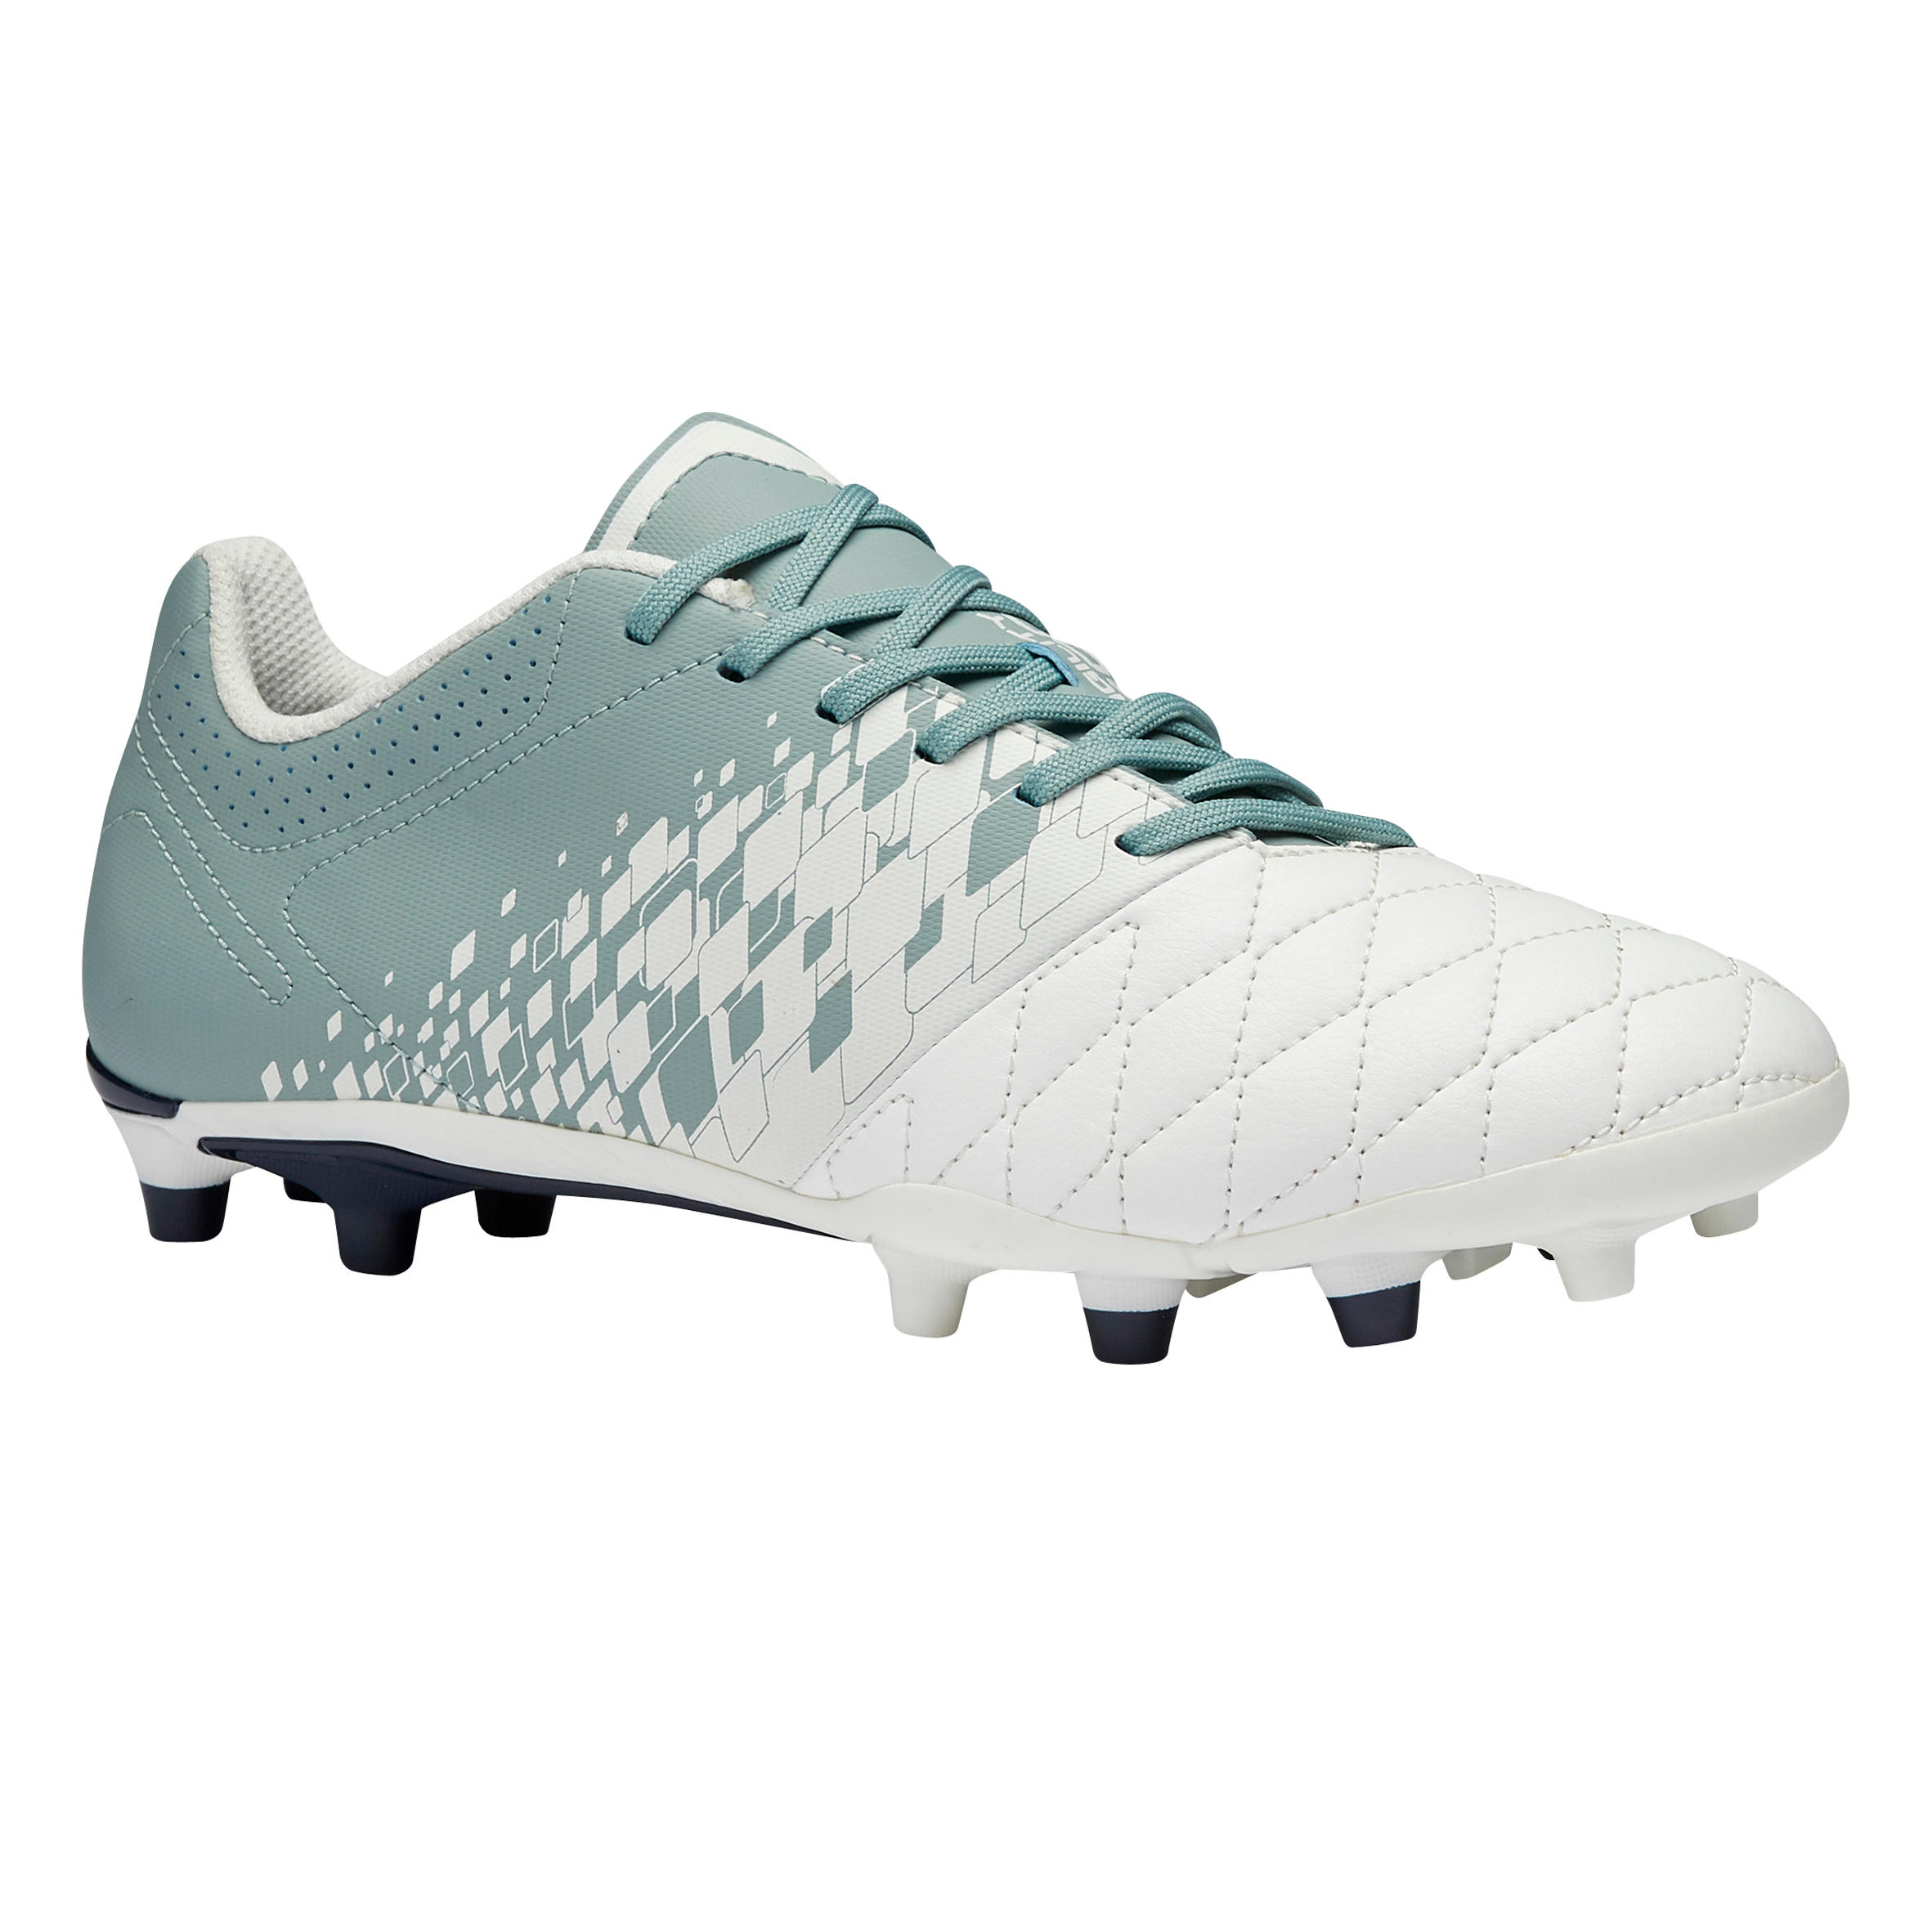 womens cleats soccer